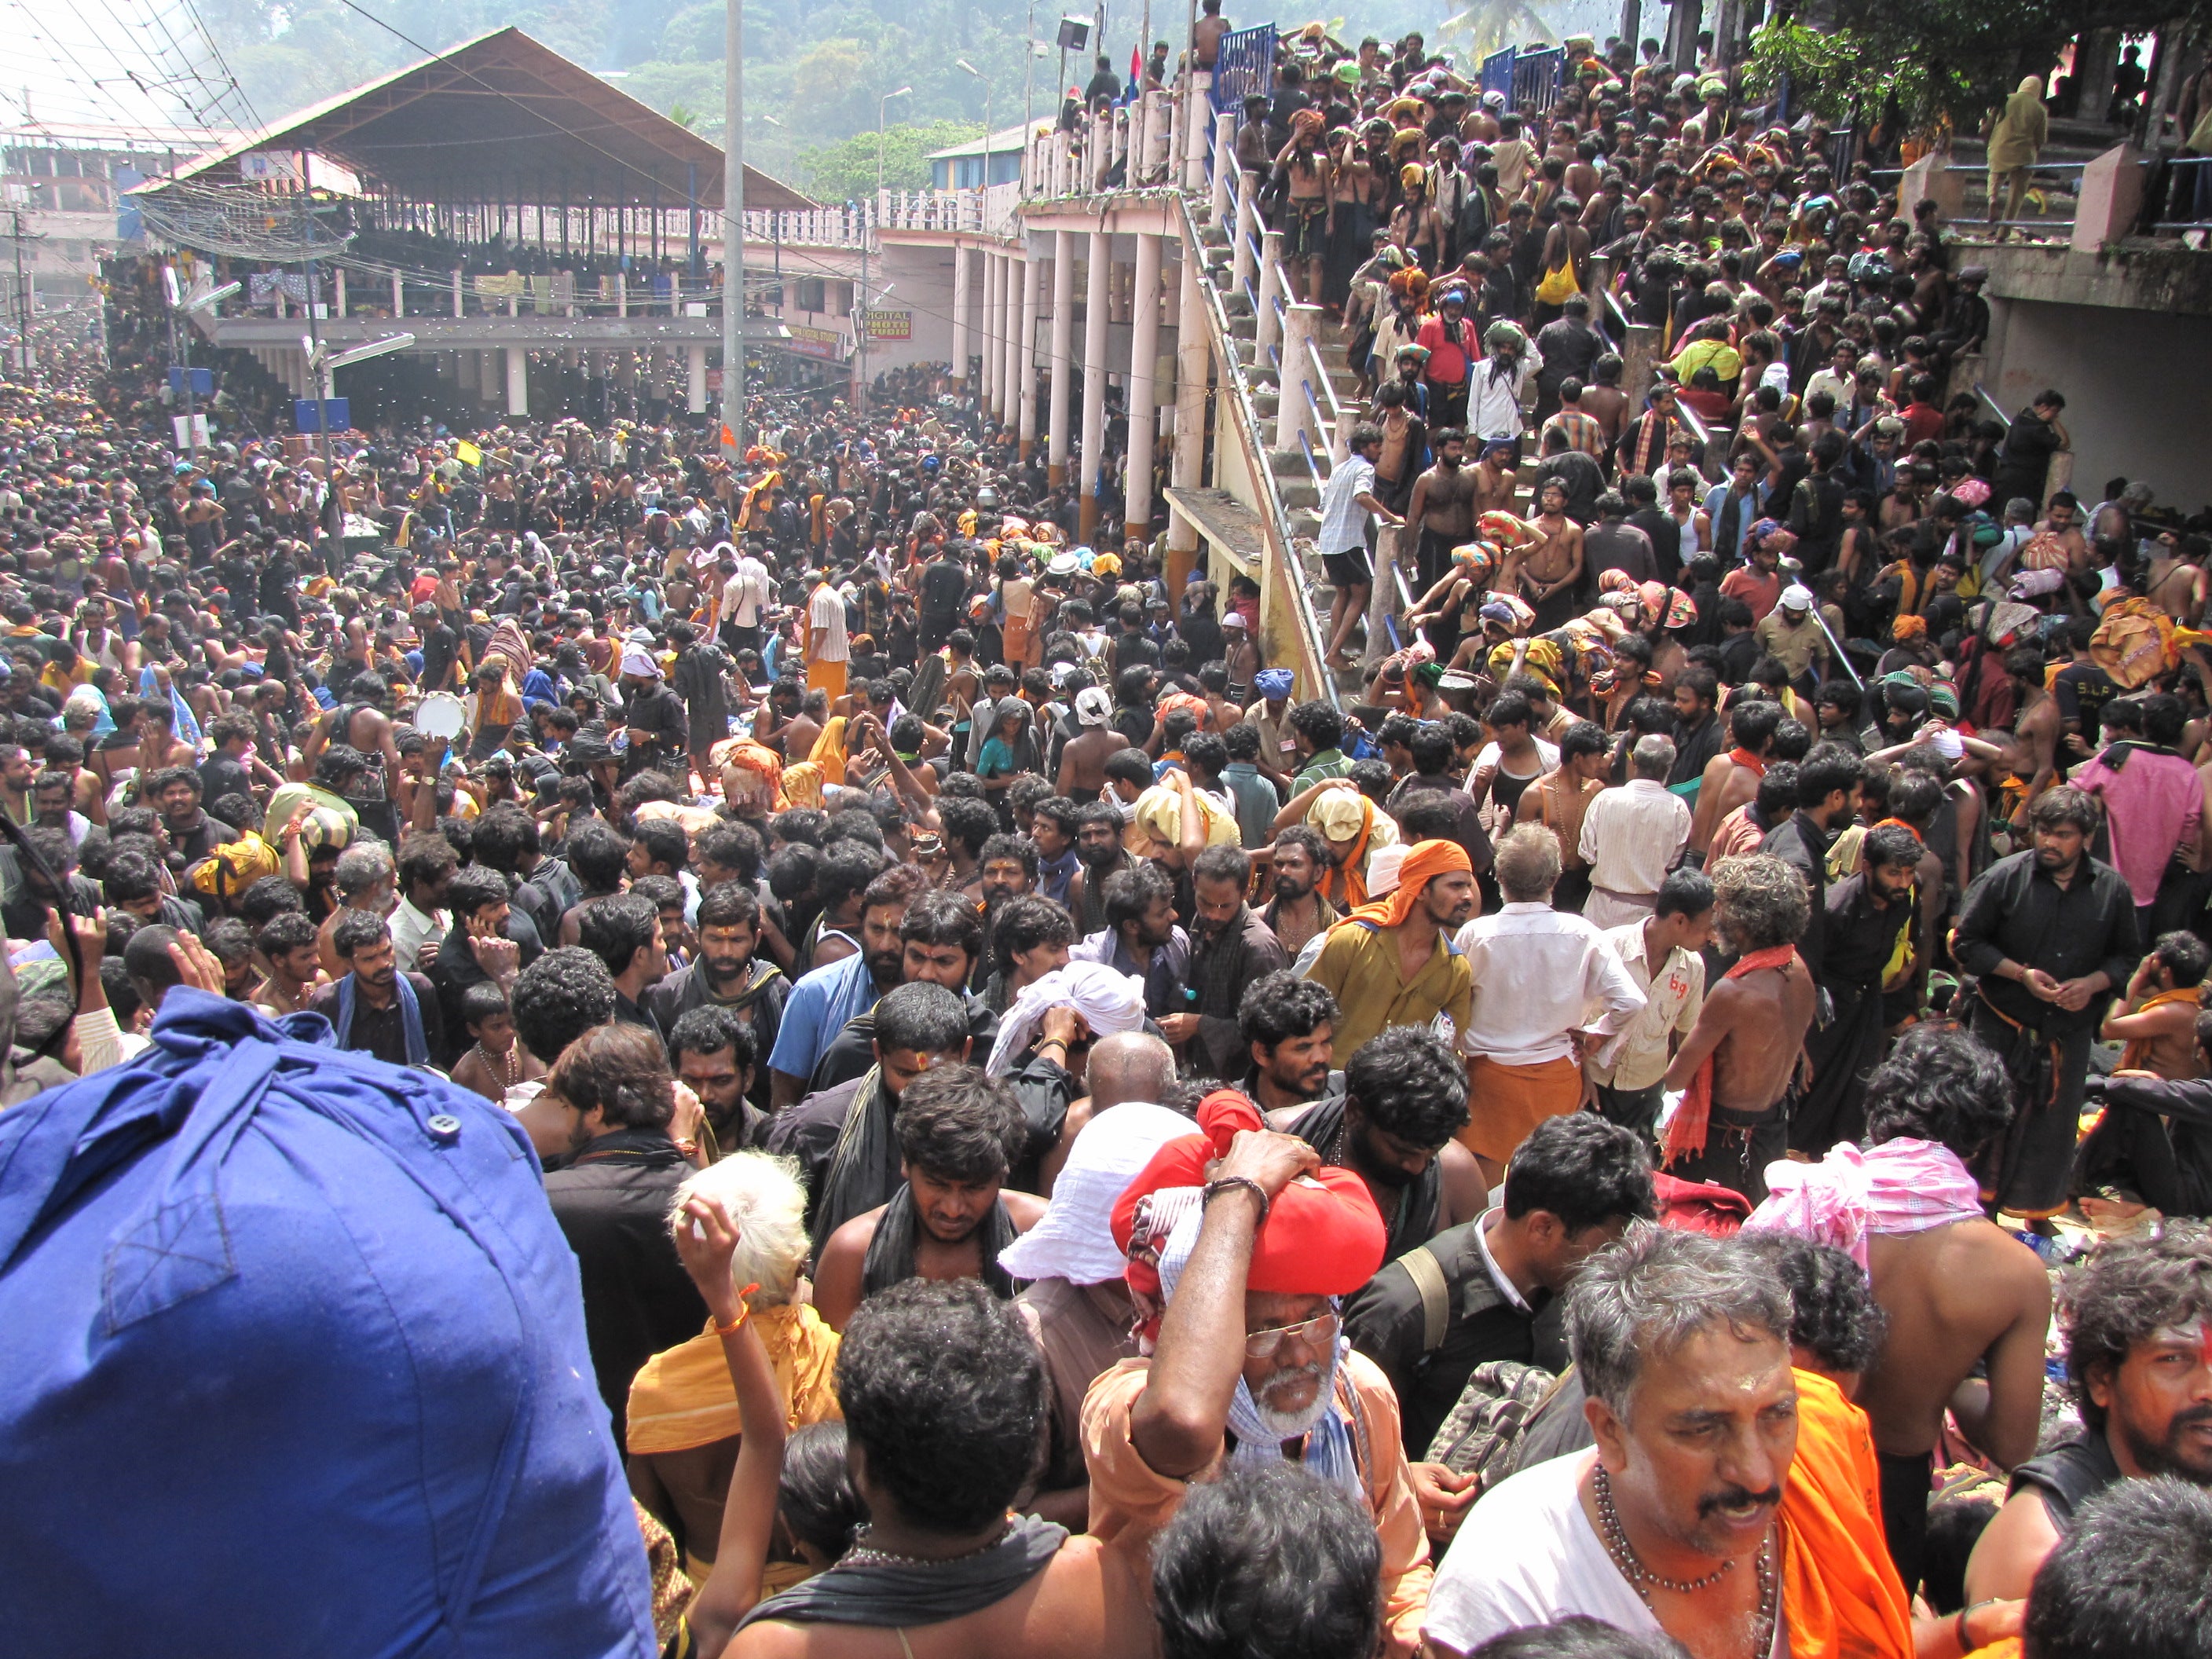 Denying Women Entry to the Sabarimala Temple Amounts to Untouchability